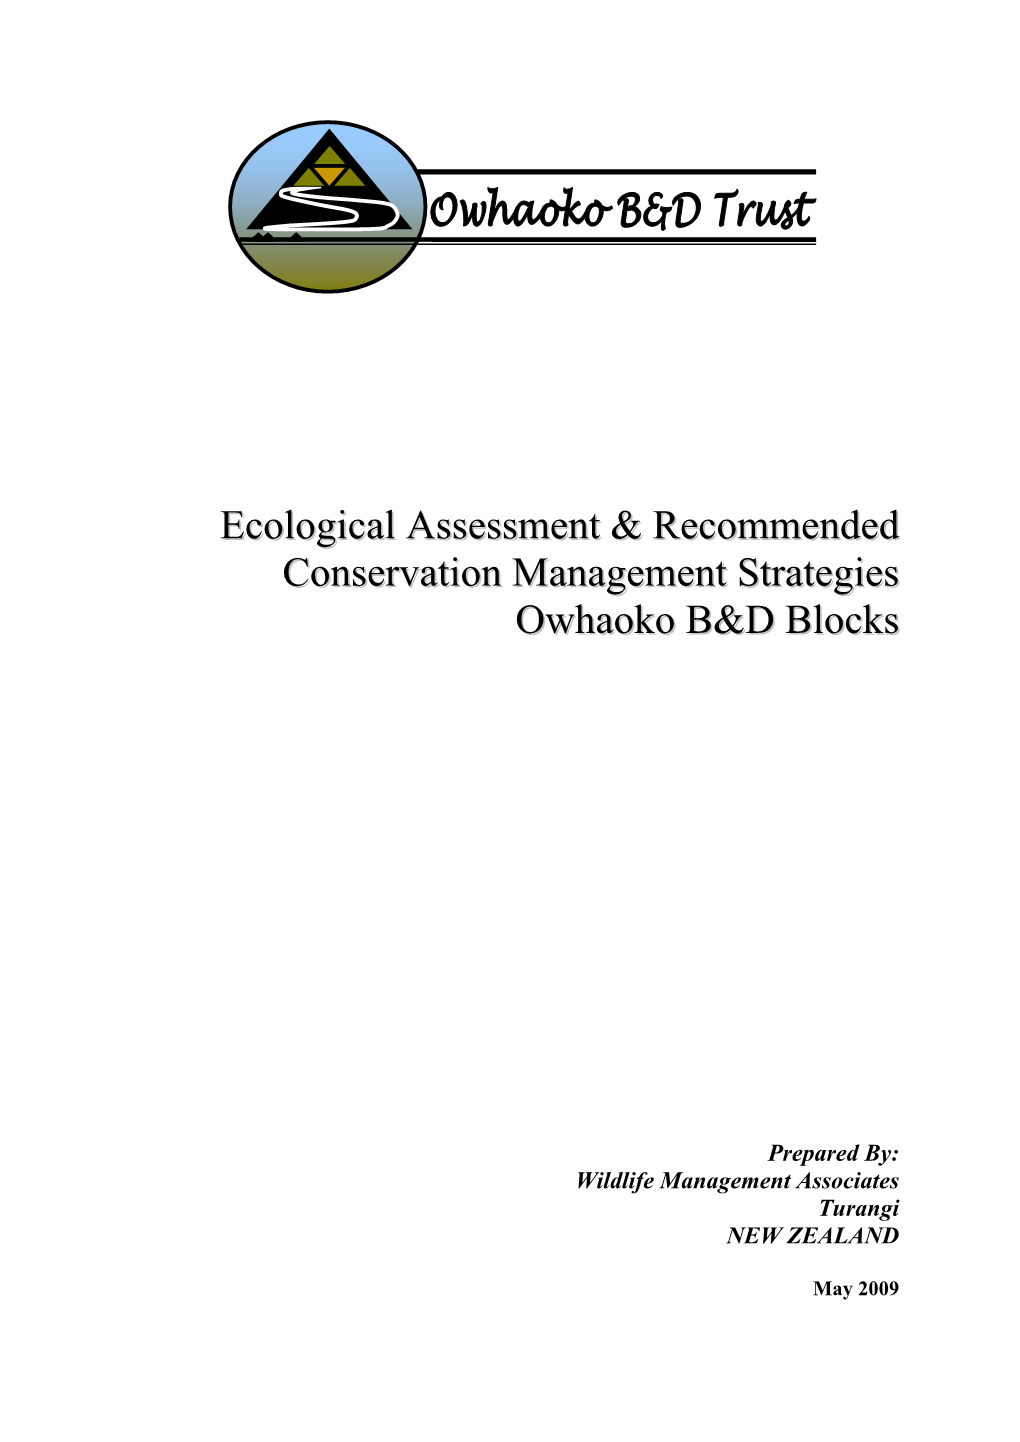 Ecological Assessment & Recommended Conservation